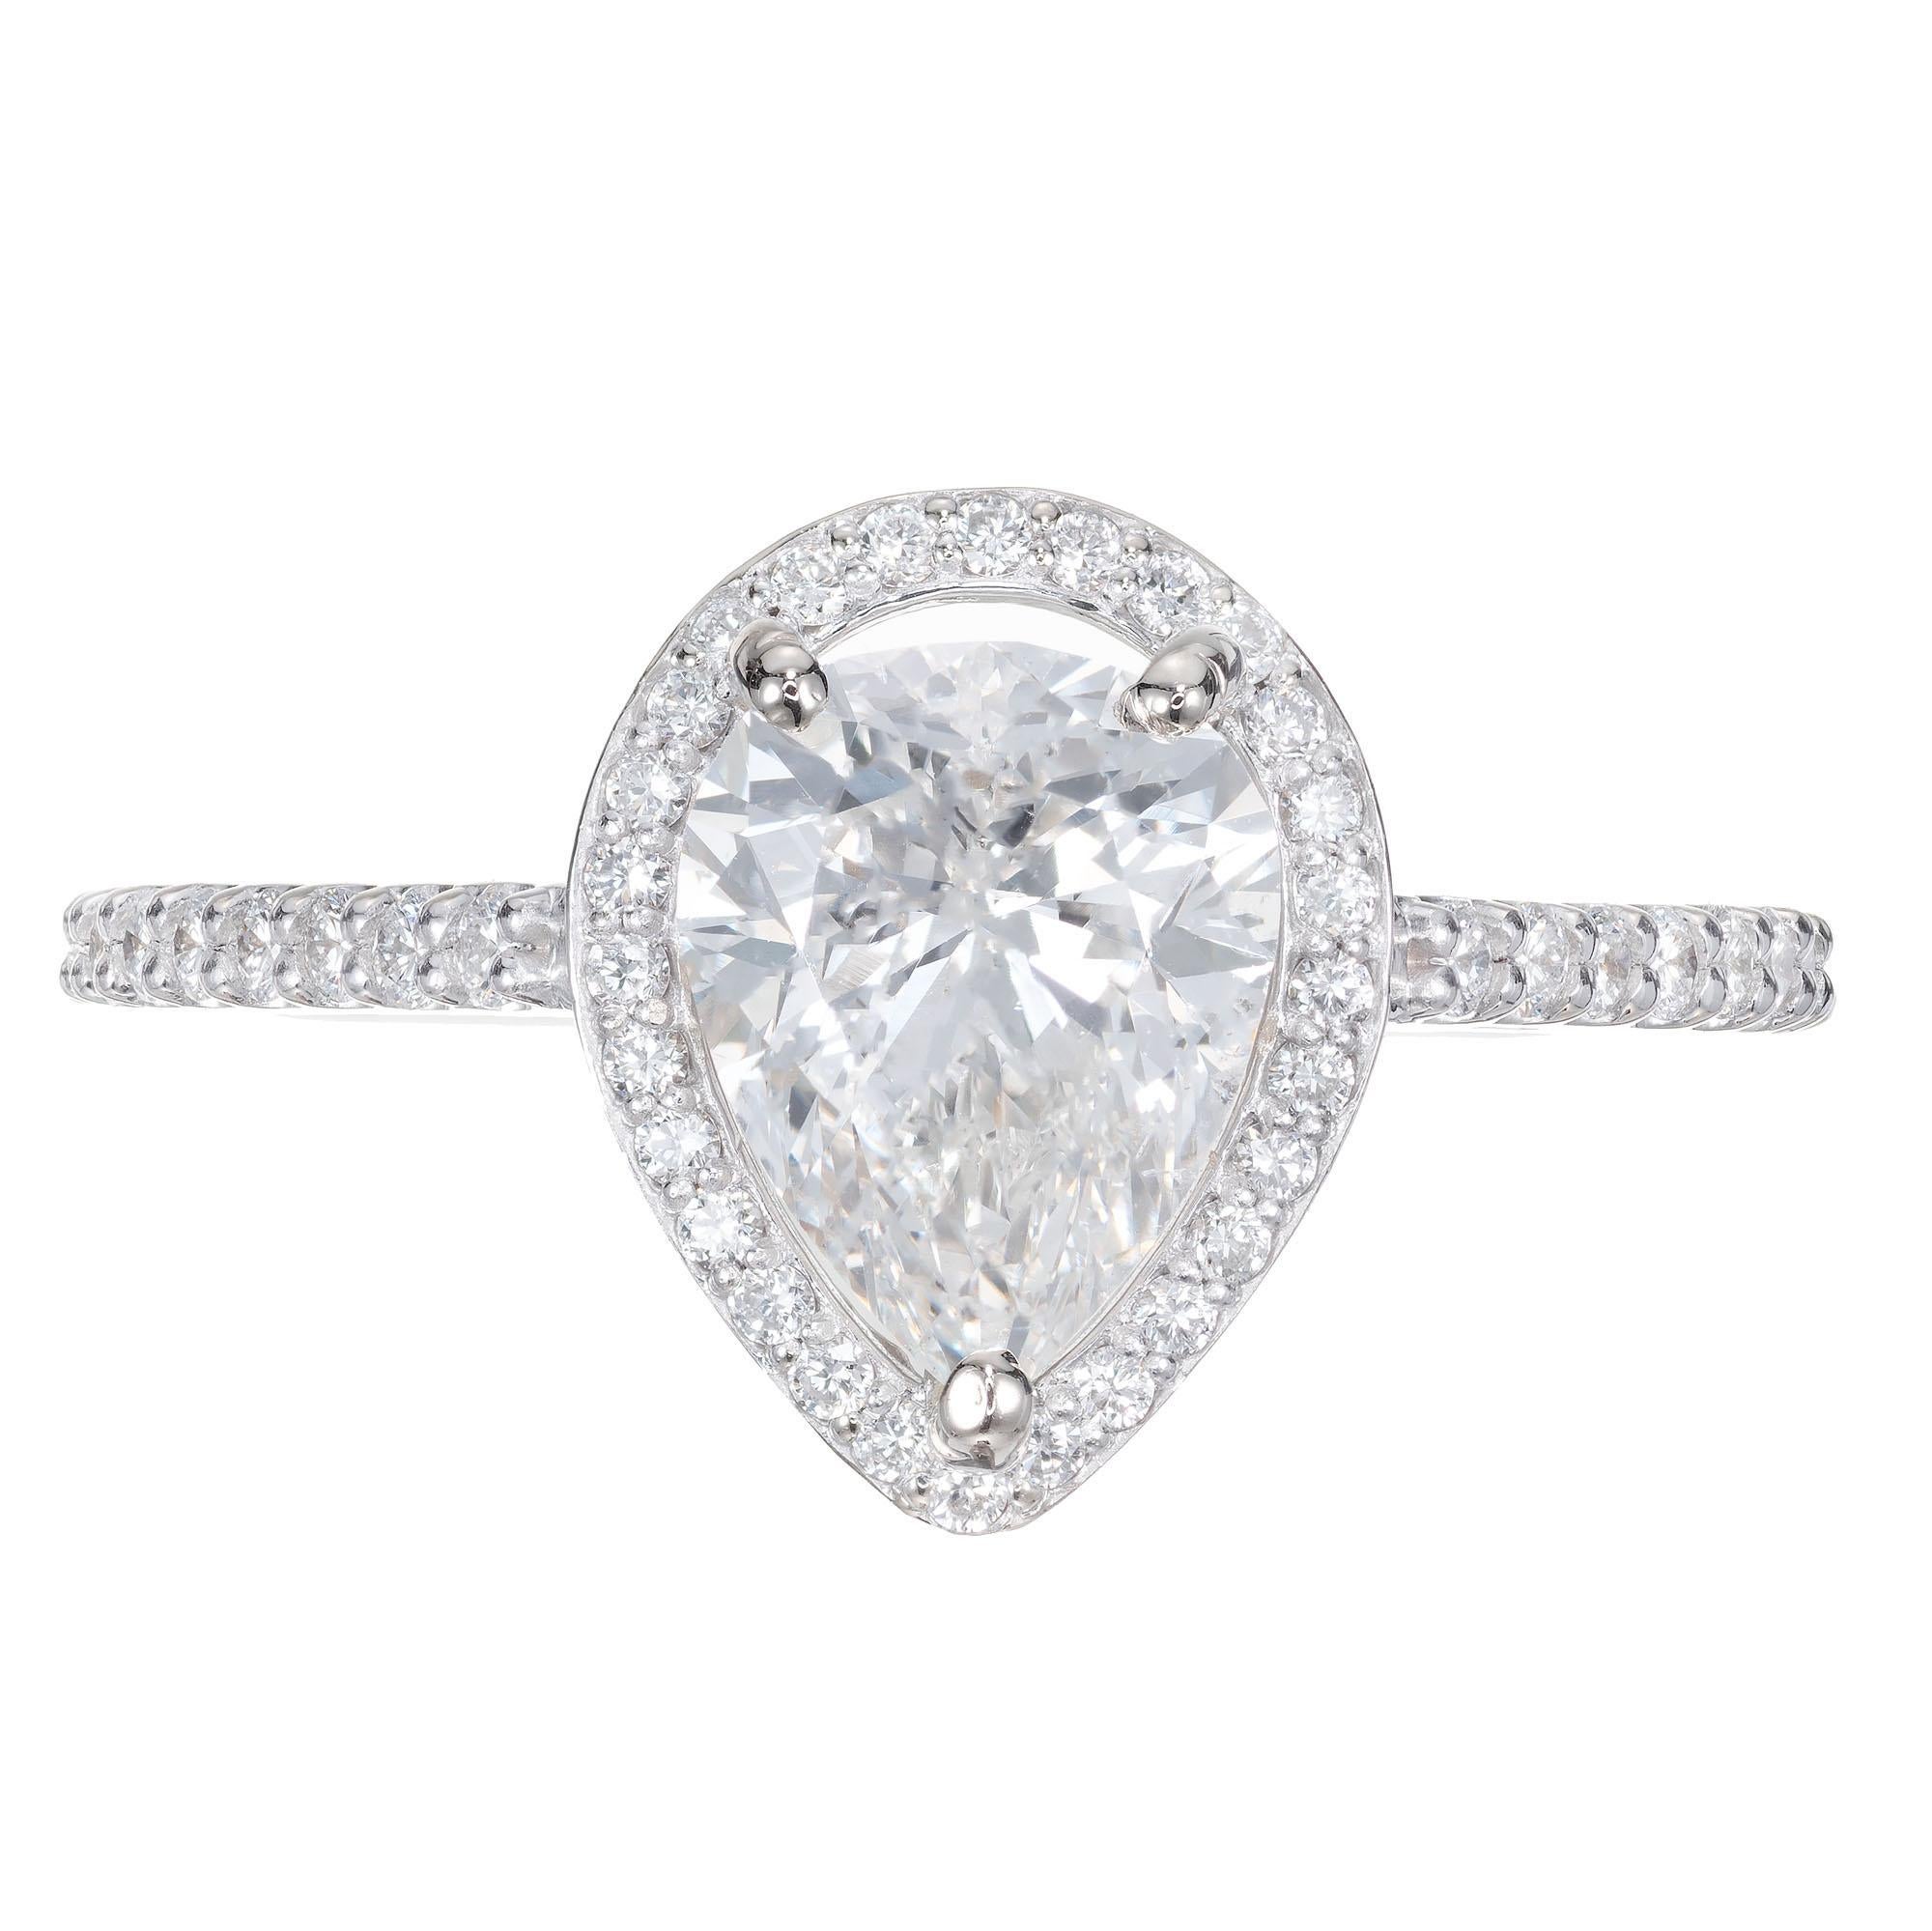 Peter Suchy classic pear shape halo engagement ring. GIA certified center stone with a haolo of 48 round full cut diamonds in a 14k white gold settings. 

1 pear shaped Diamond, approx. total weight 1.65cts, J, SI2, GIA certificate #5182332929
48